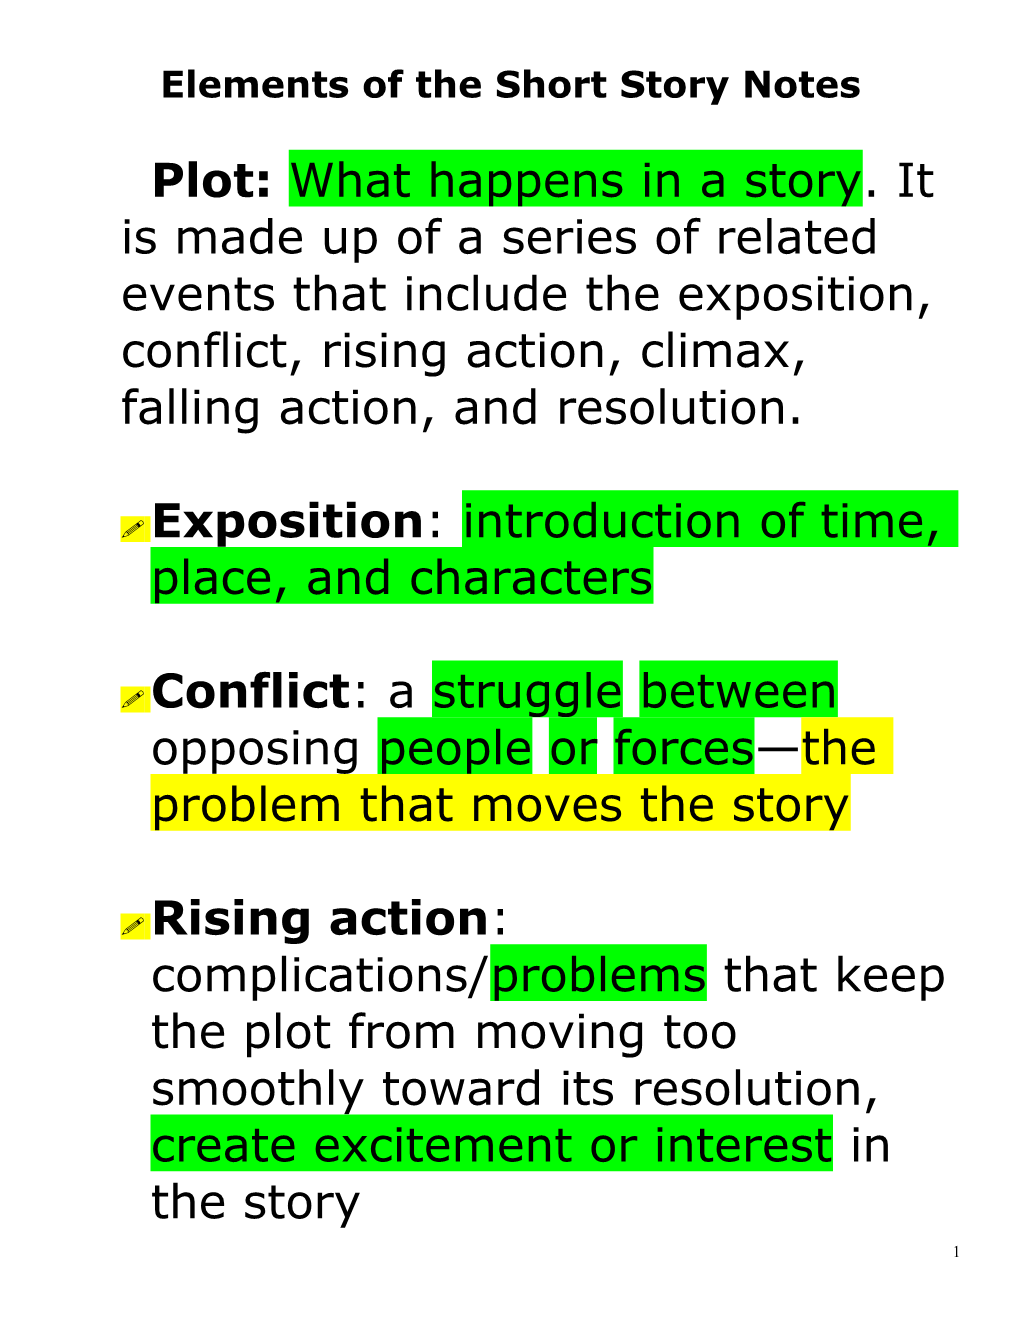 Elements of the Short Story Notes